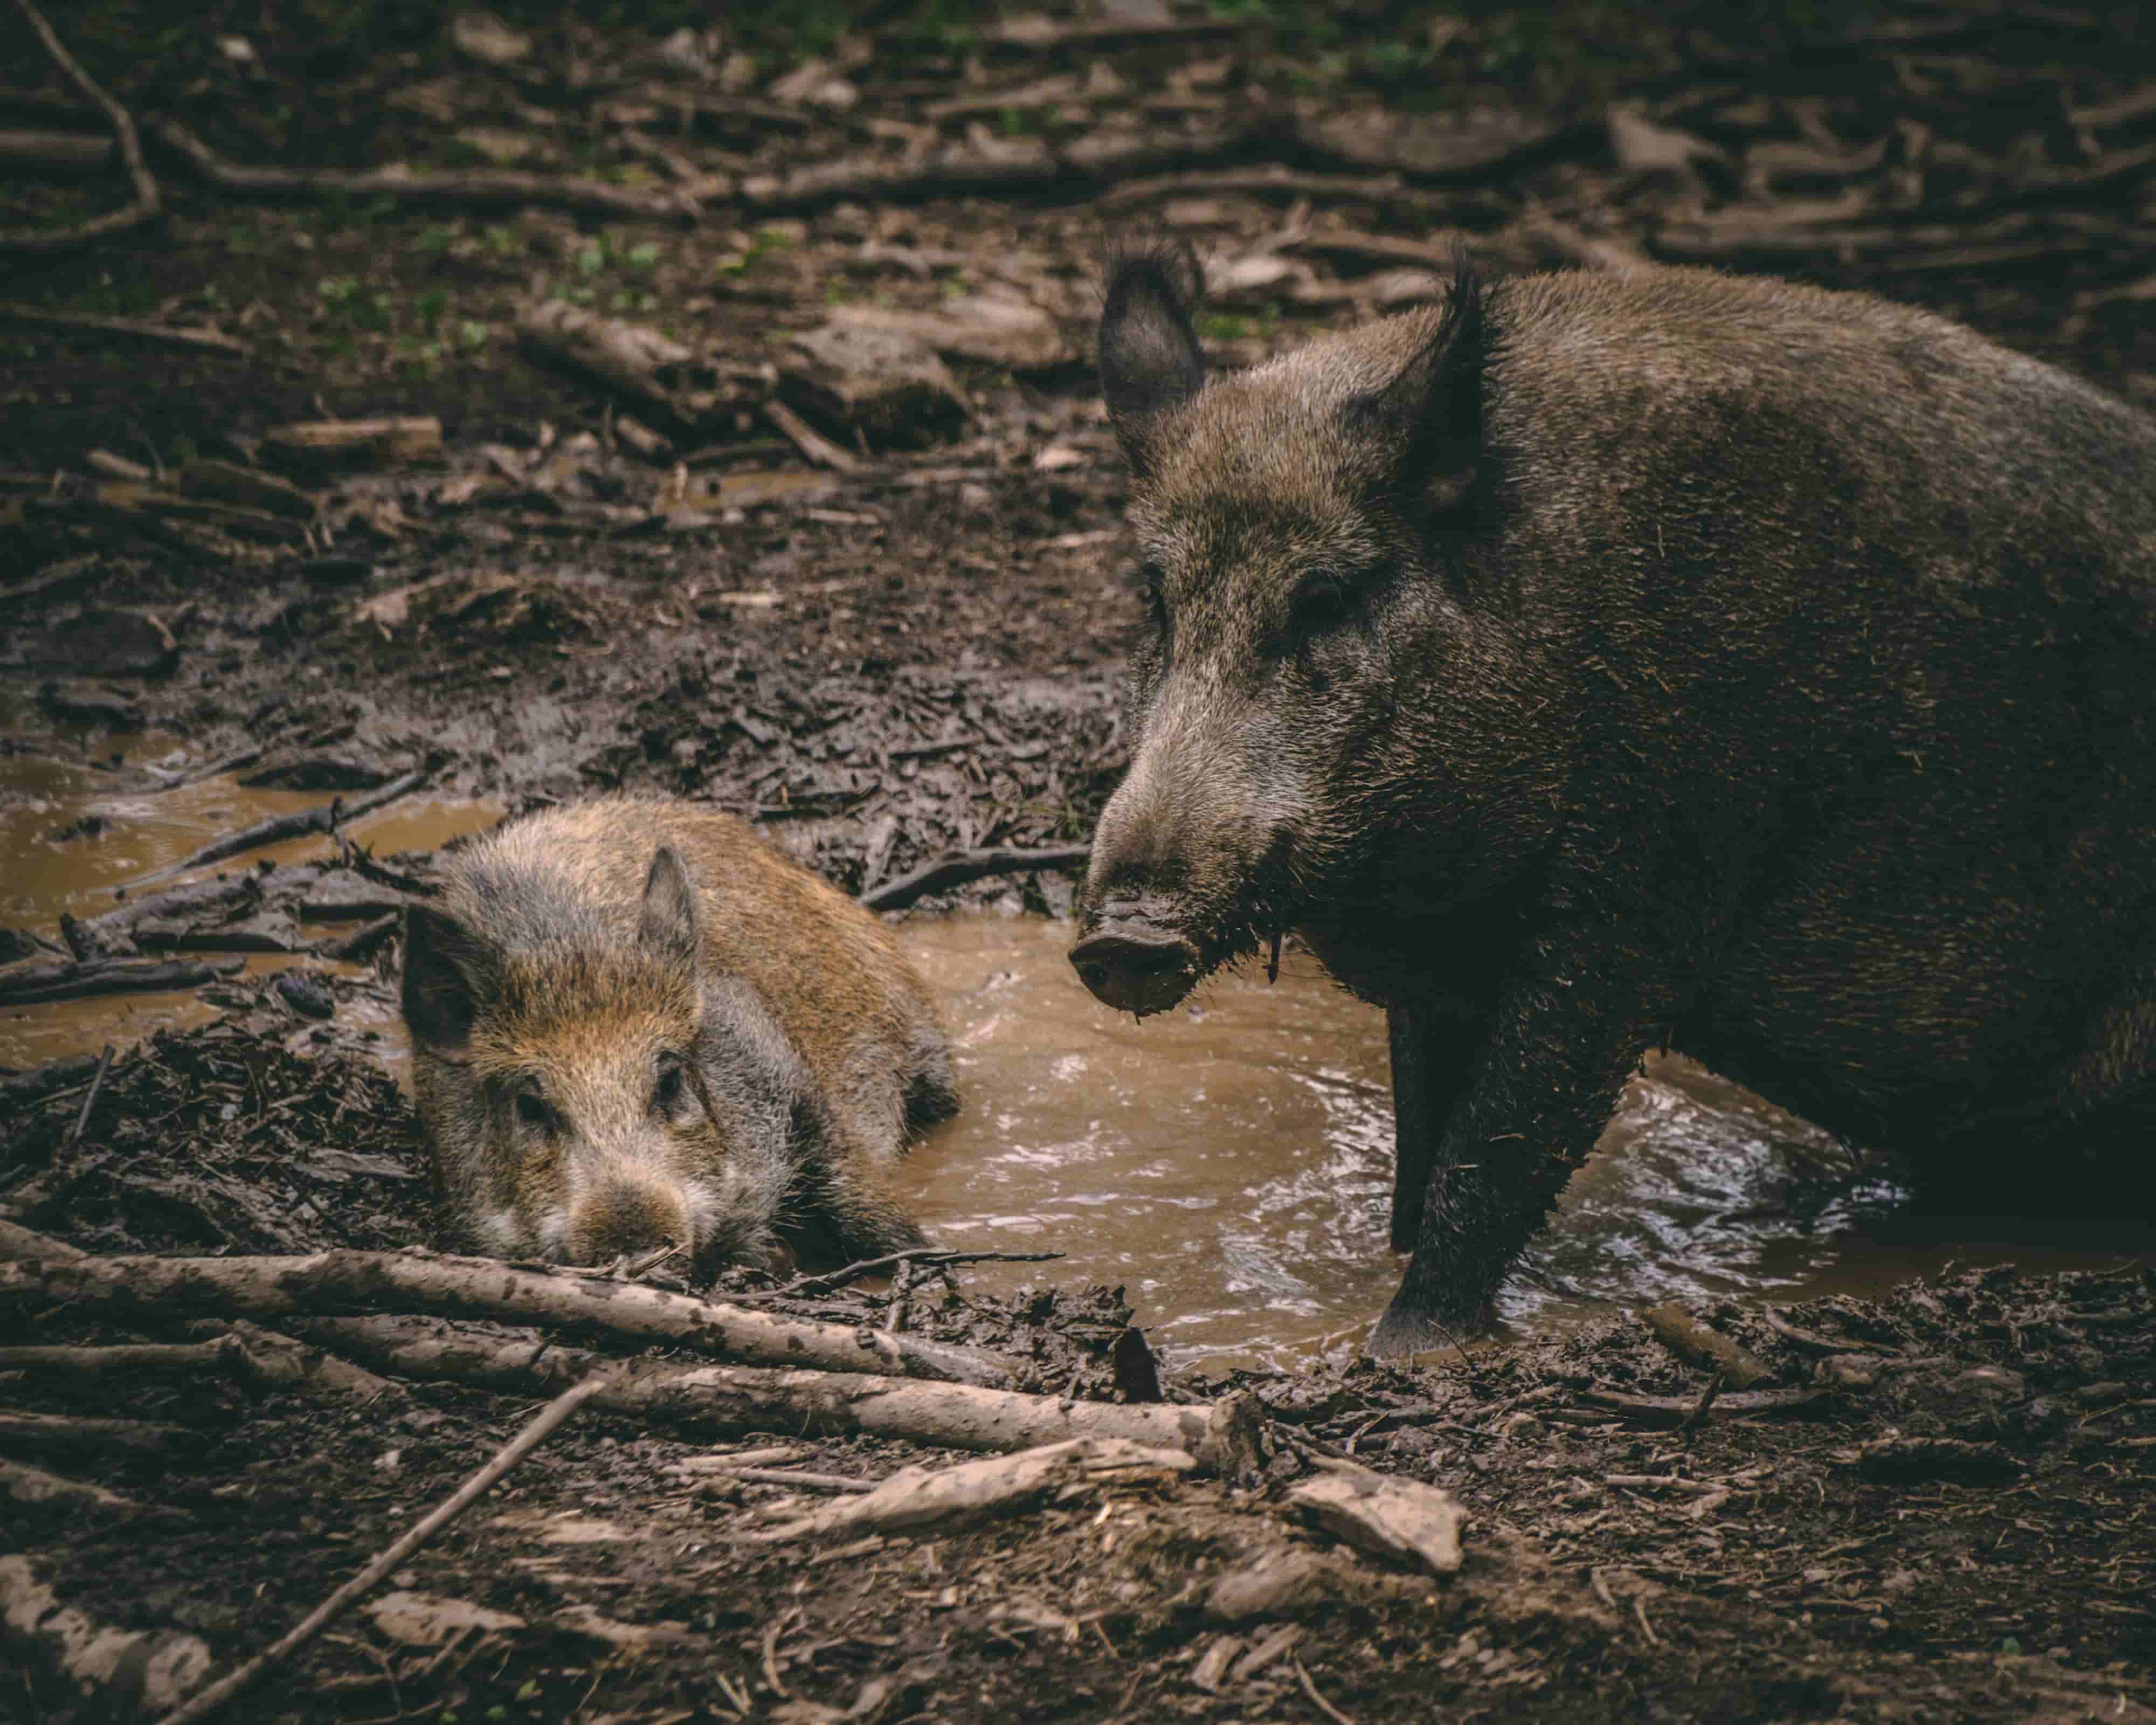 Study: Nuclear Weapons Tests Behind Radioactivity in Wild Boars